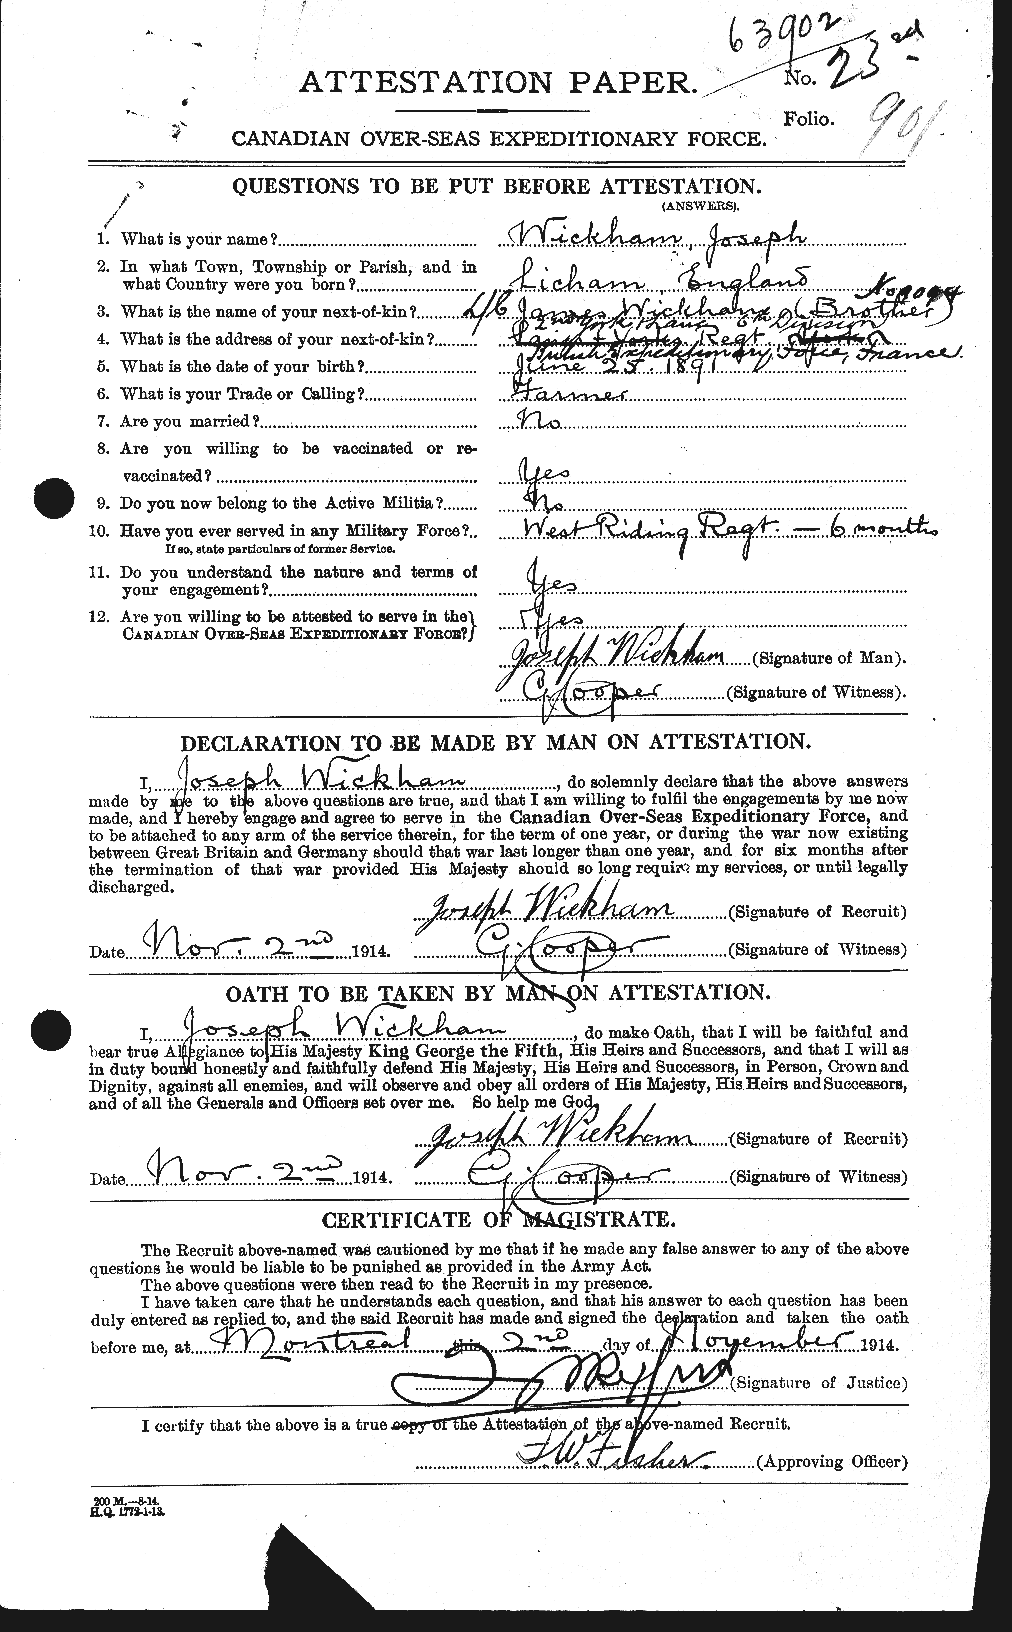 Personnel Records of the First World War - CEF 673953a